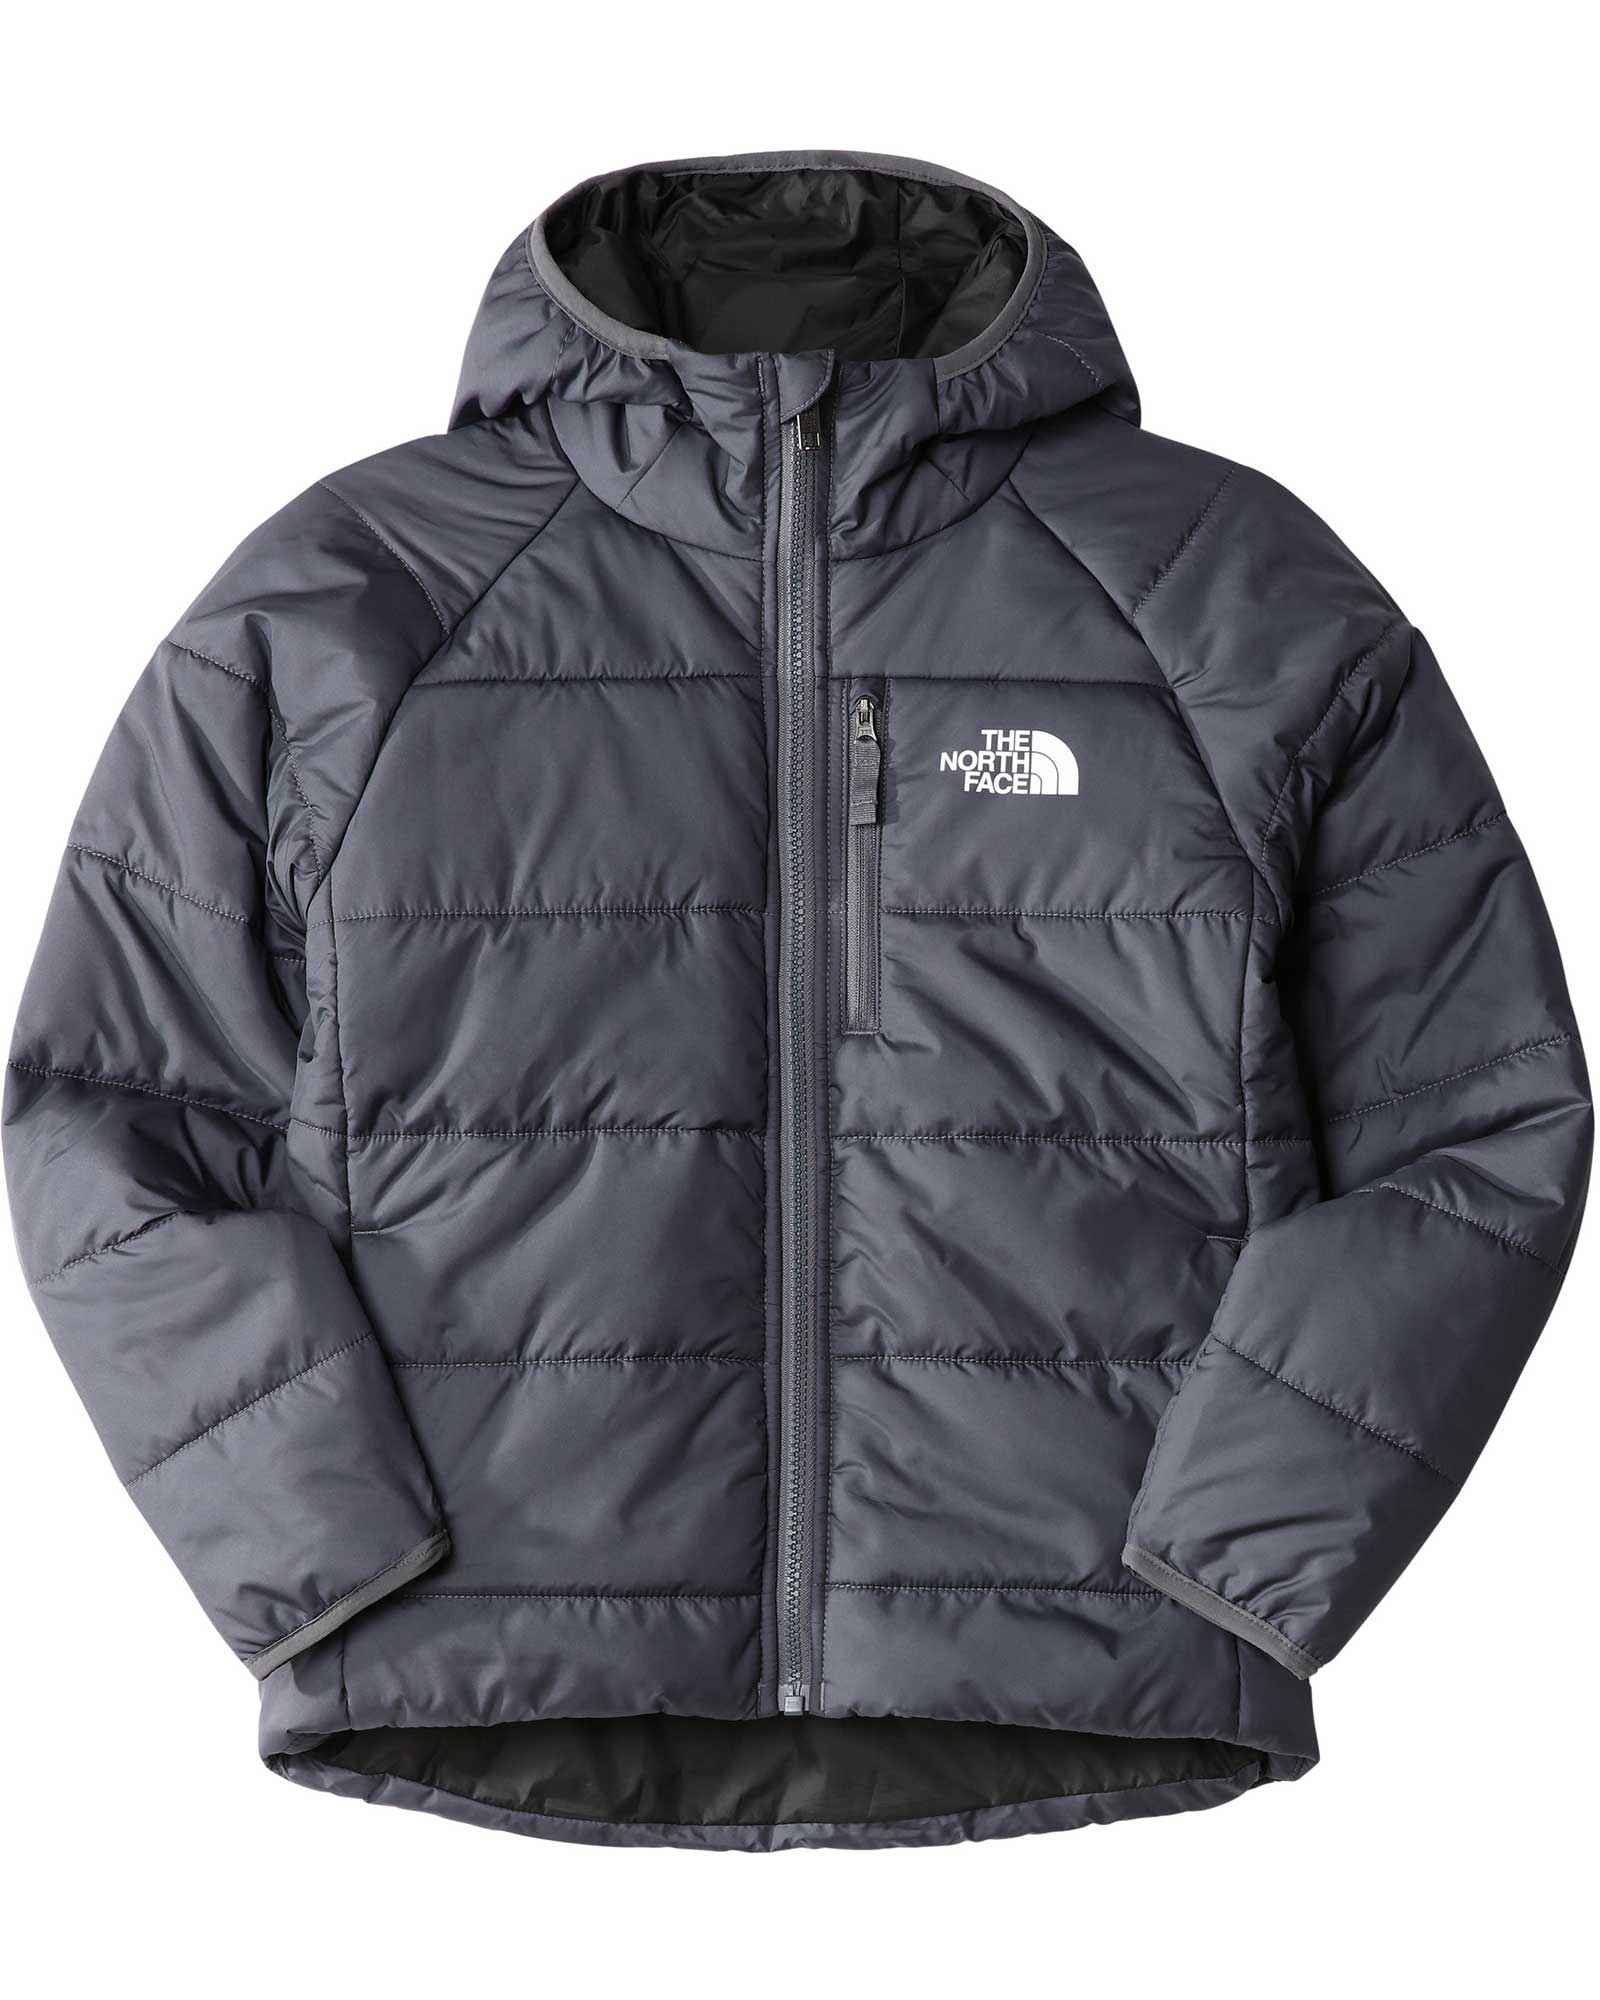 Product image of The North Face Reversible Perrito Kids' Jacket